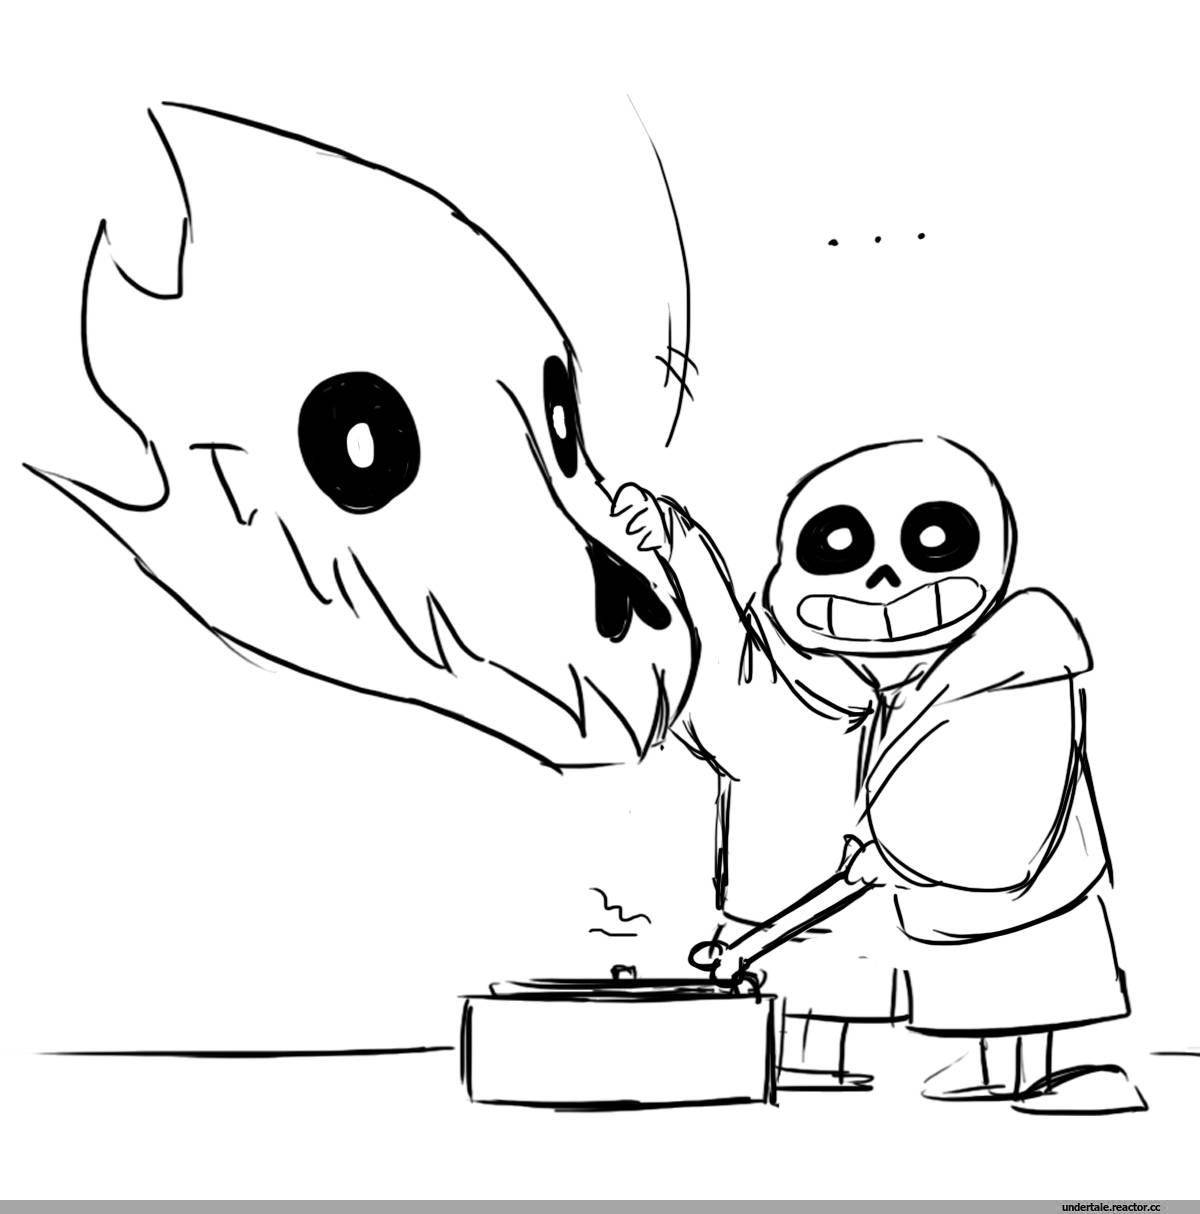 Coloring page charming gaster